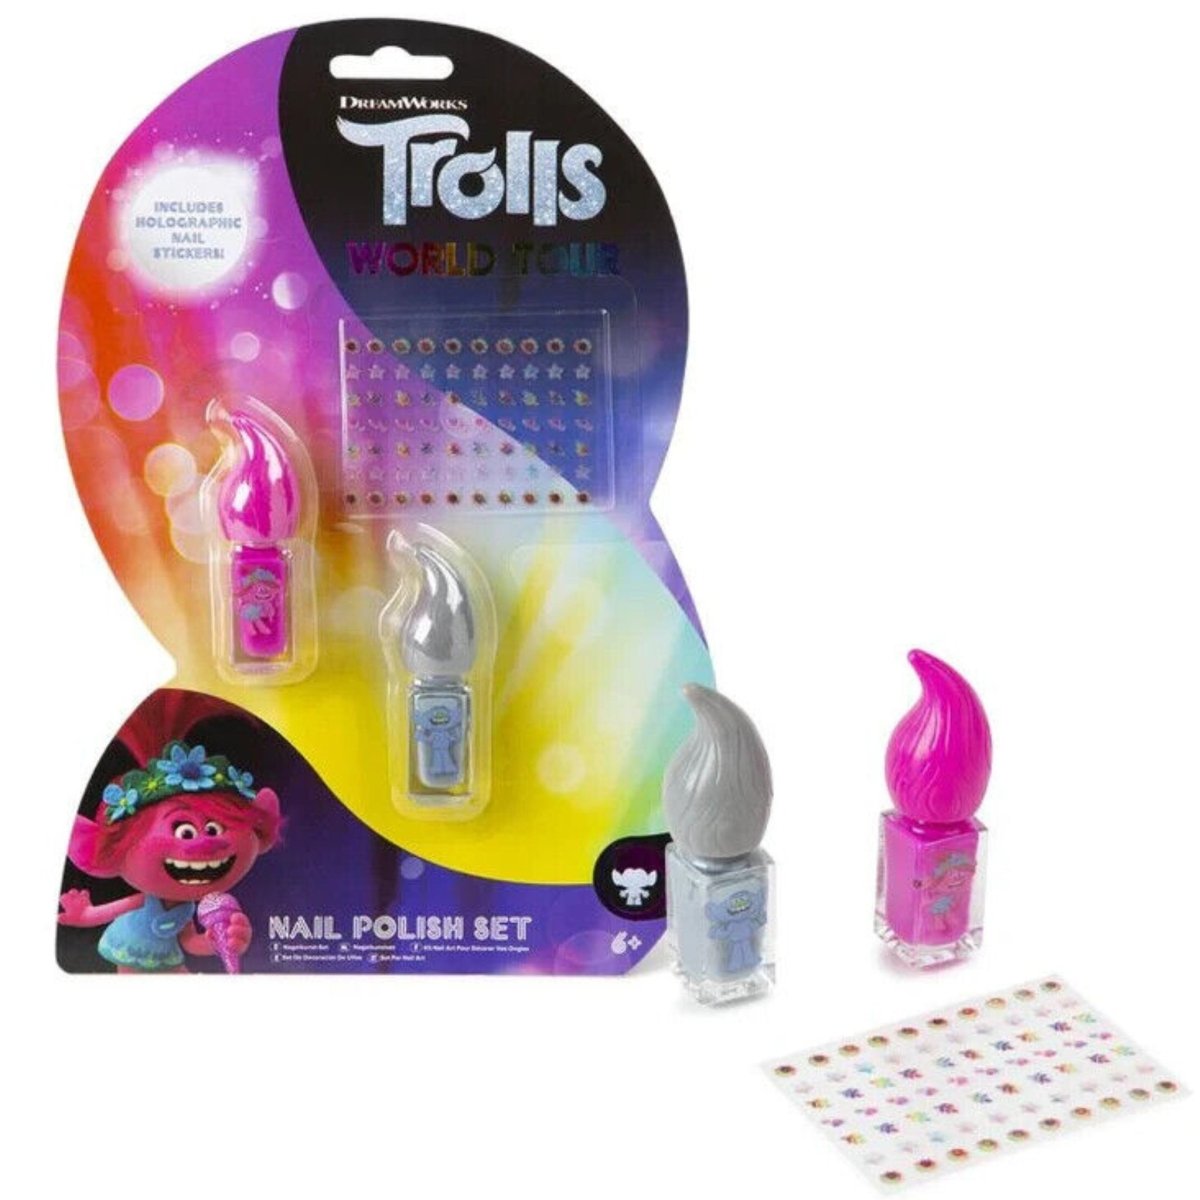 Trolls Kids Nail Polish With Holographic Nail Stickers Set Gift - Kids Party Craft